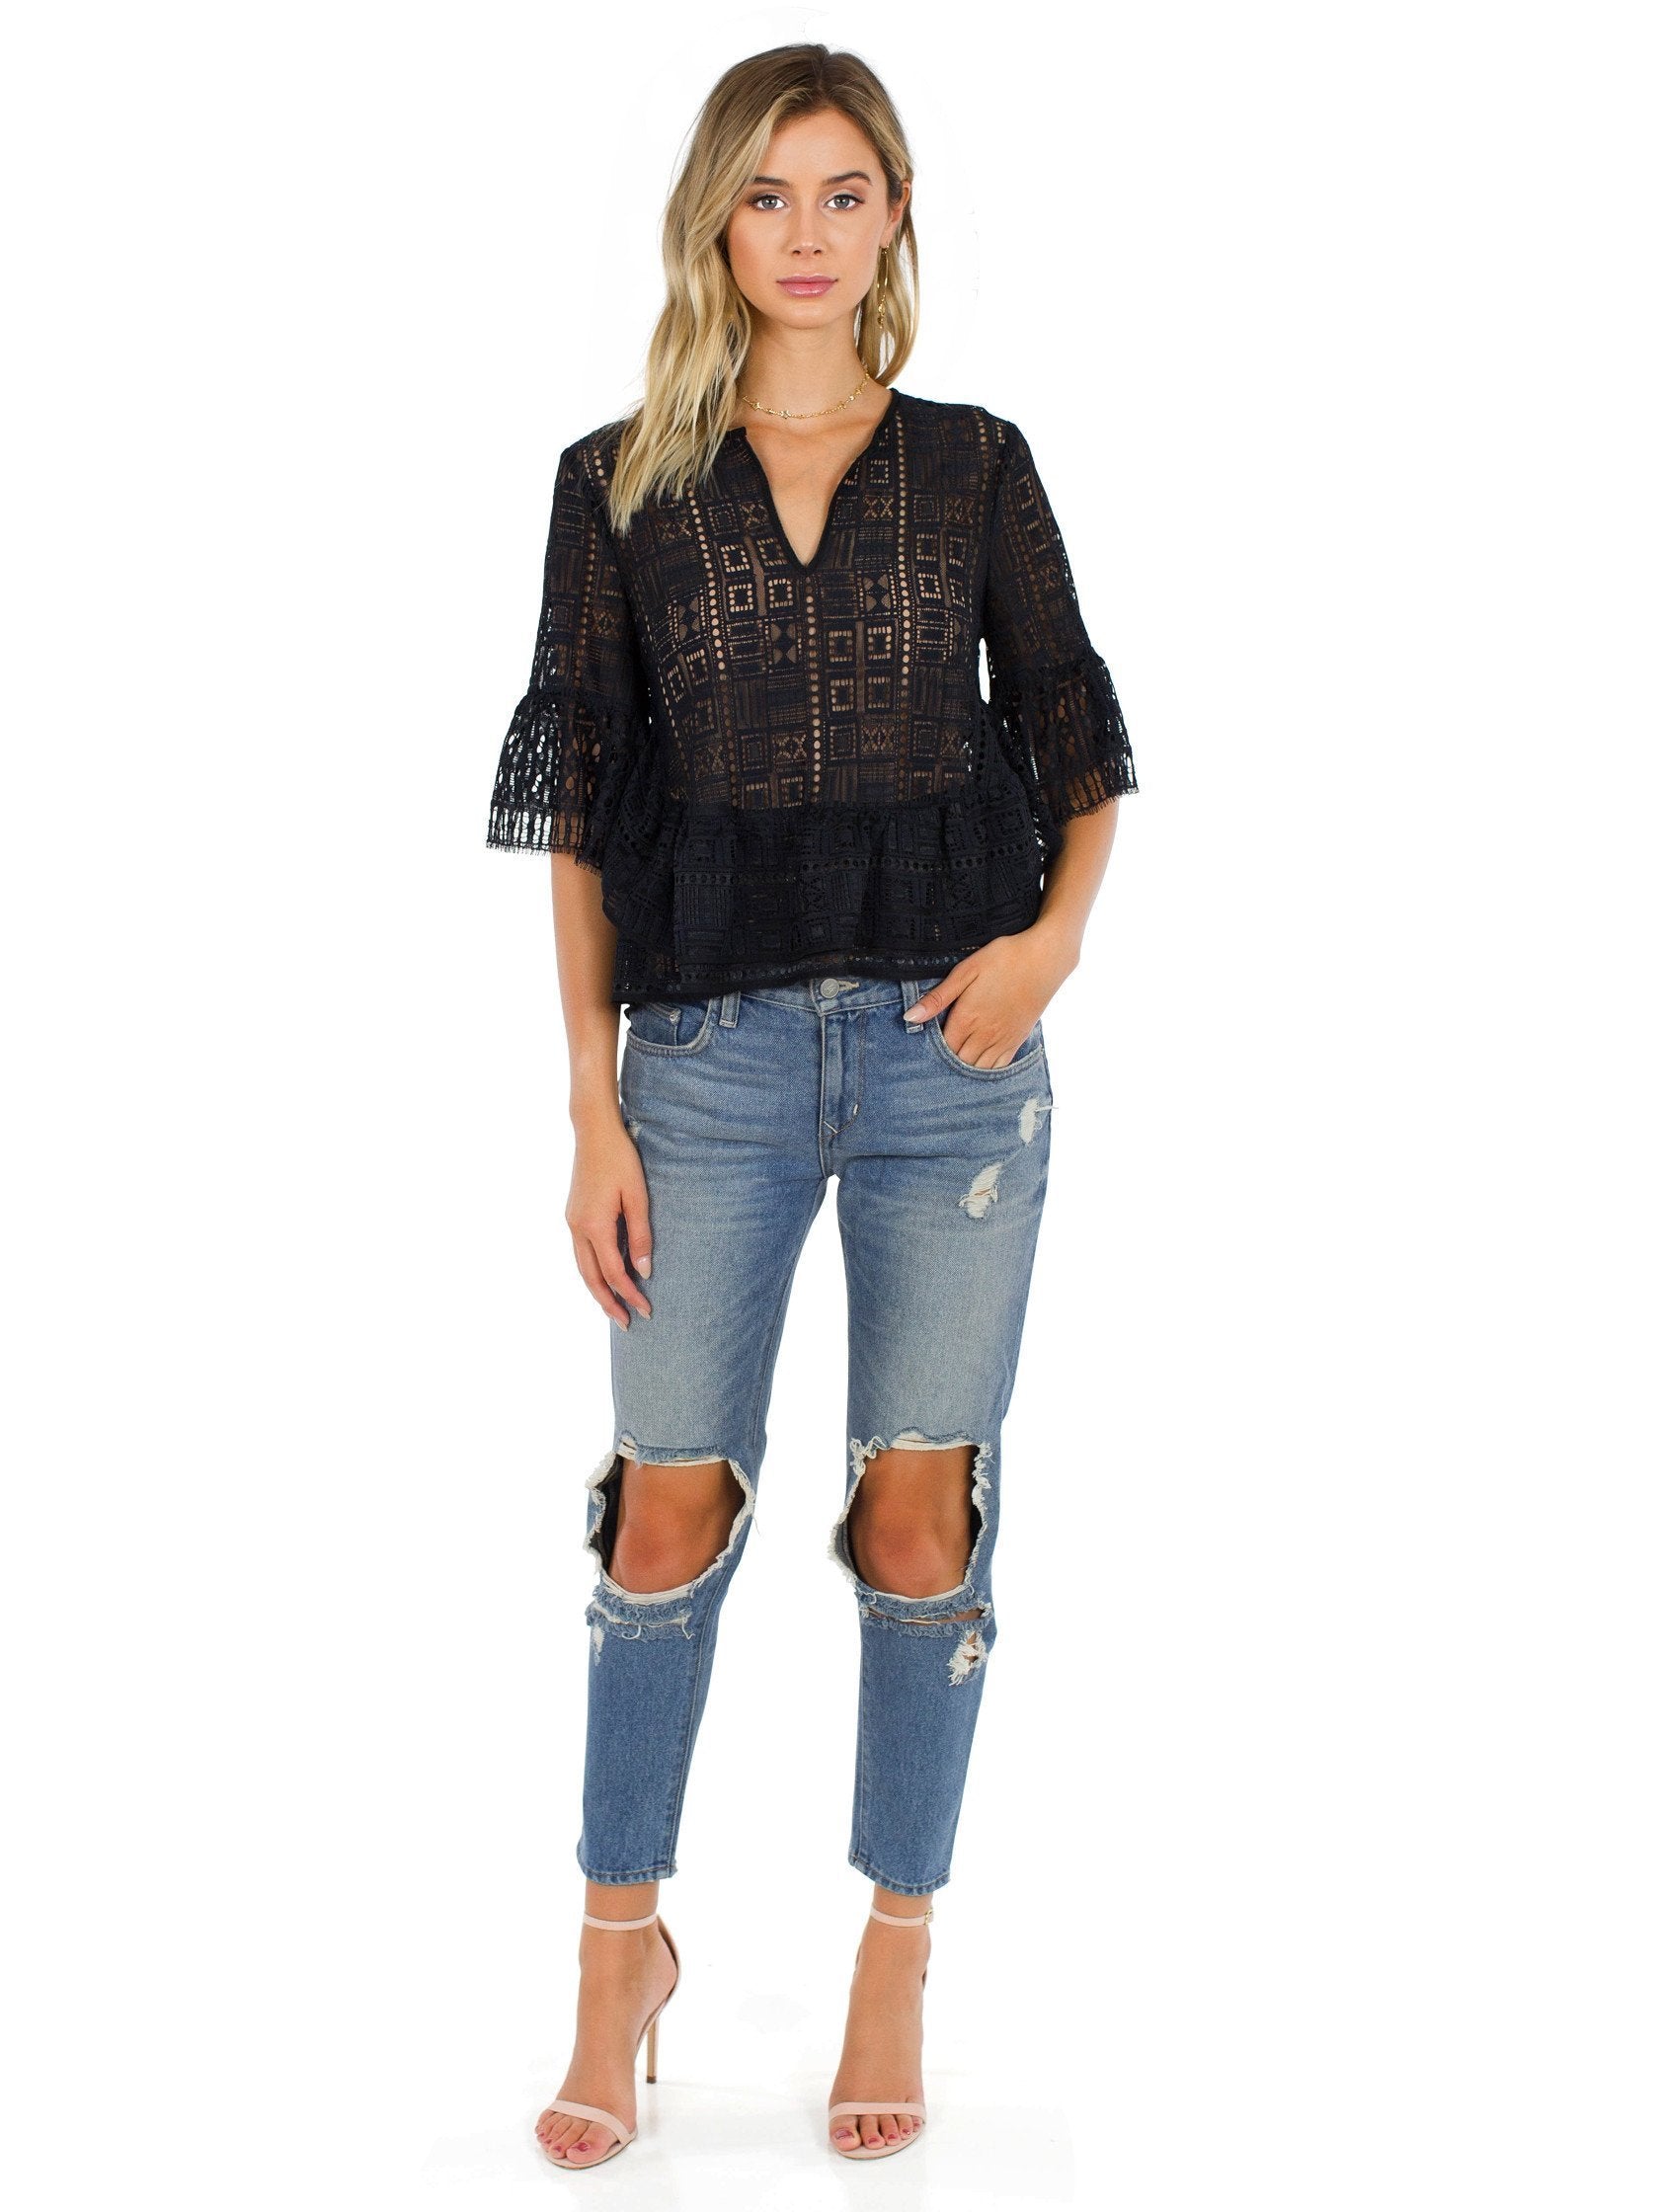 Girl wearing a top rental from BCBGMAXAZRIA called Immane Ruffled Lace Top